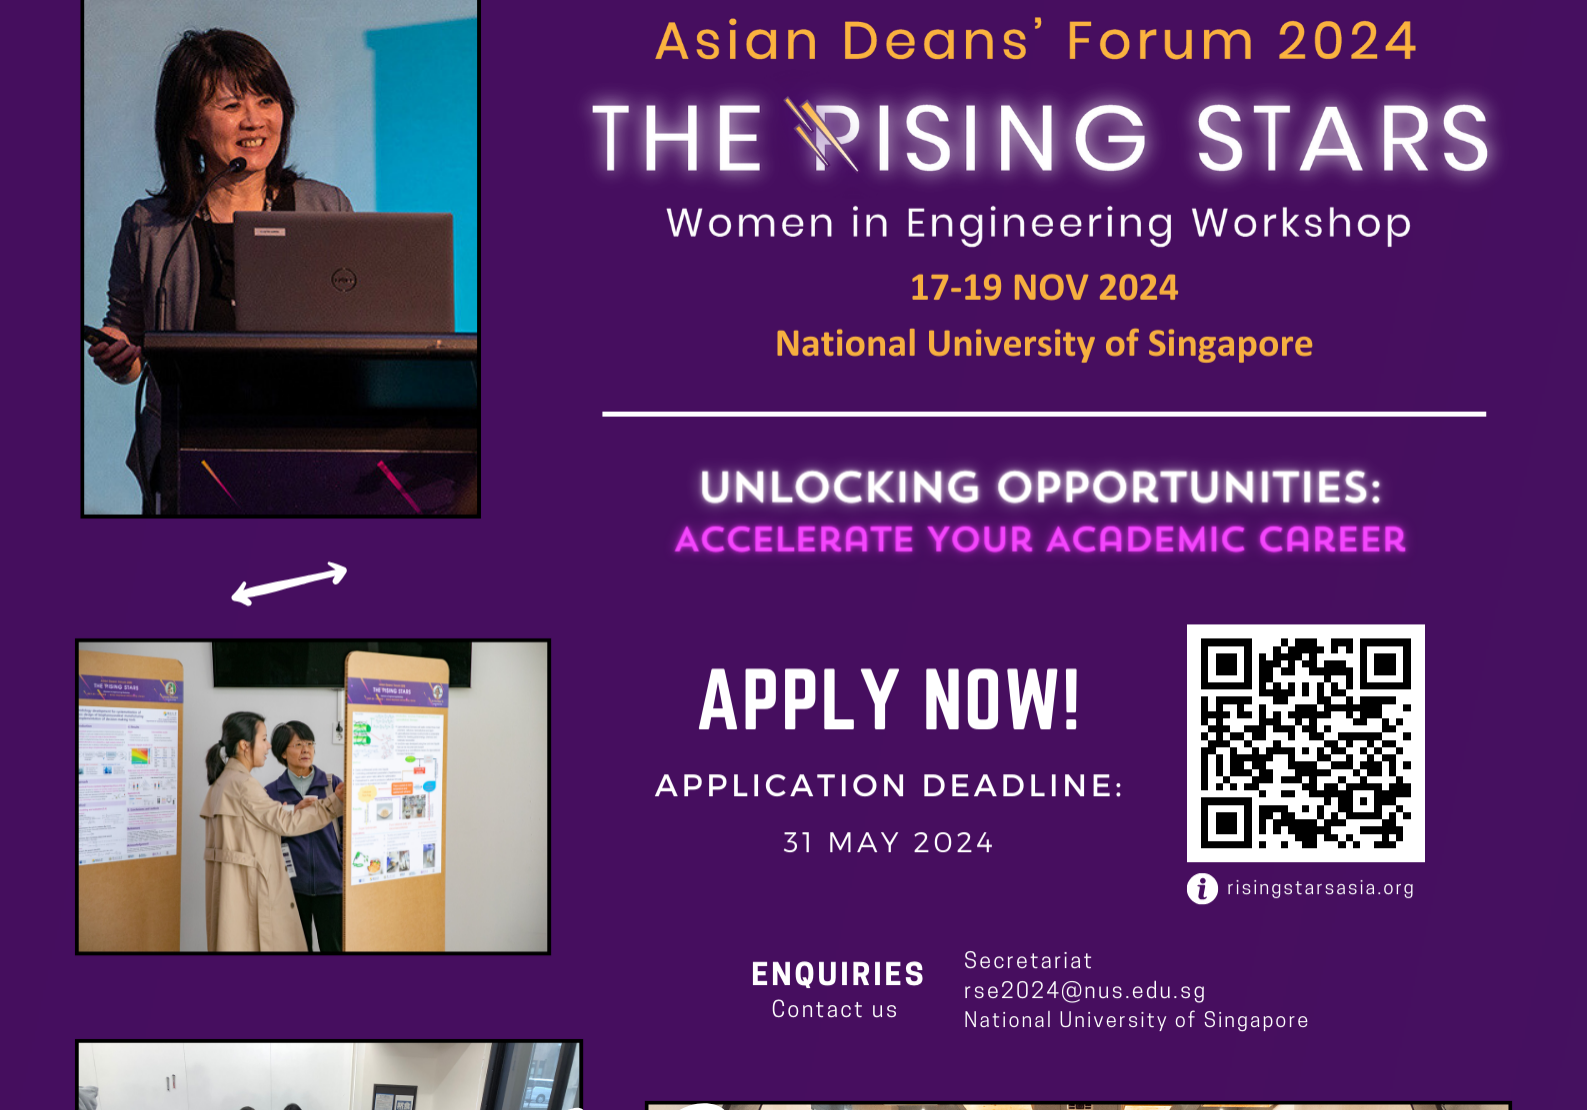 Asian Deans' Forum 2024 – The Rising Stars Women in Engineering Workshop